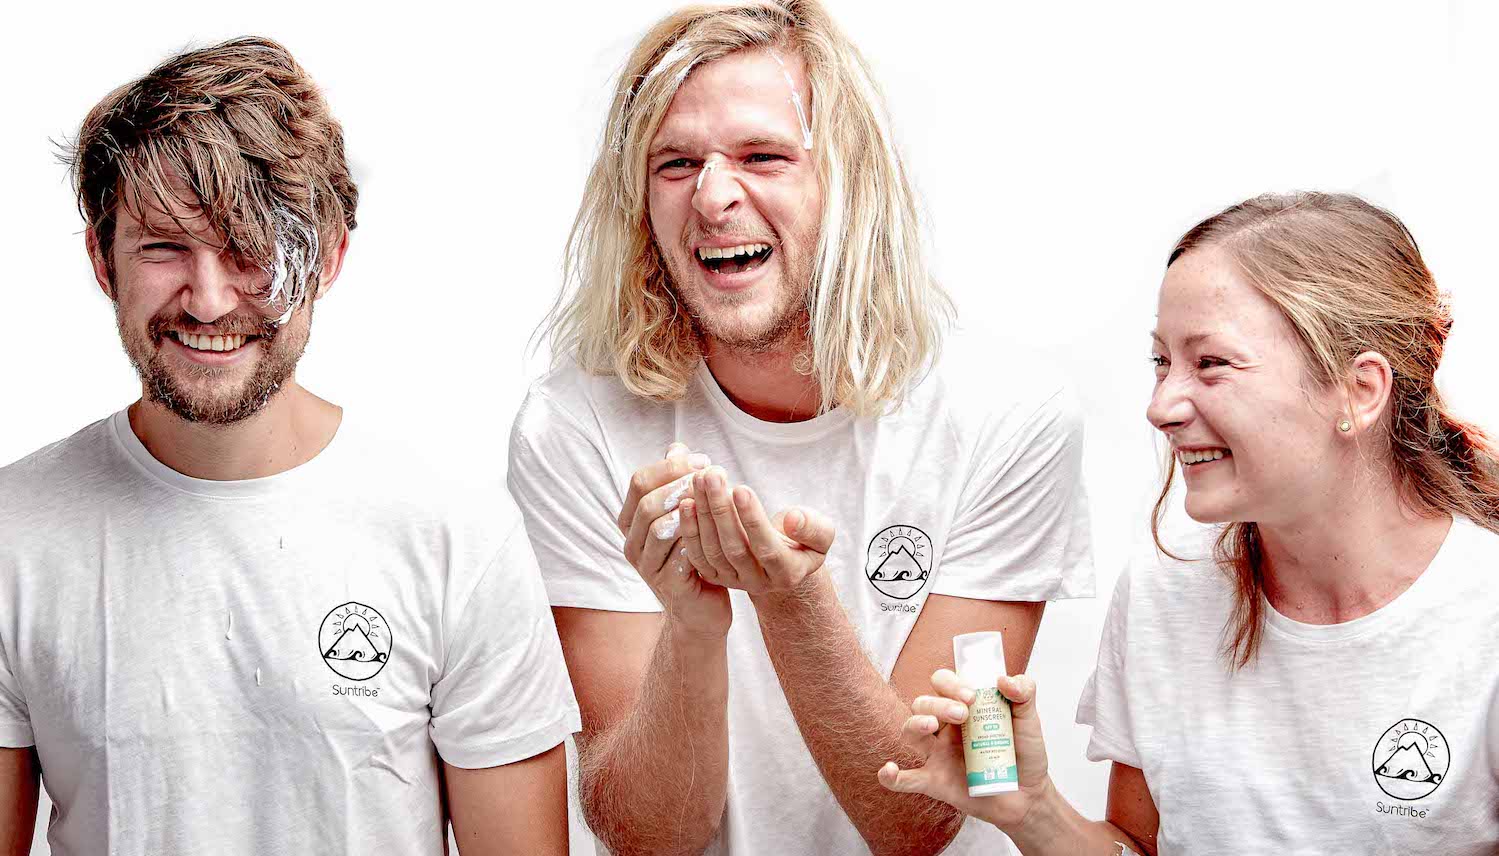 Karl Roos and his co-founders Julia Beyer and Hampus Tarras-Wahlberg. Photo: Suntribe